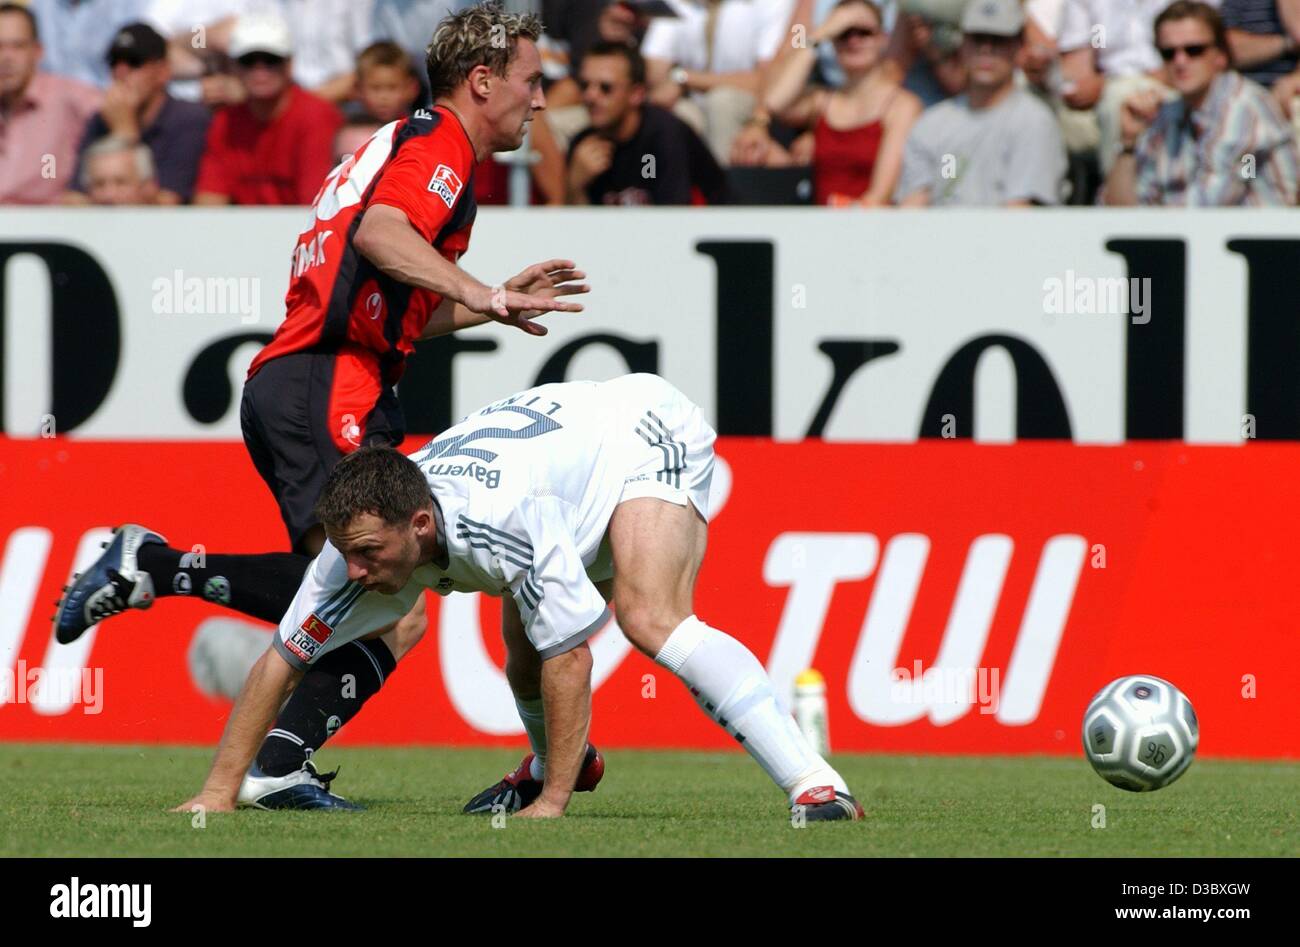 (dpa) - Bayern Munich's defender Thomas Linke (R) loses the ball to Czech midfielder Jan Simak during the Bundesliga soccer game Hannover 96 against FC Bayern Munich in Hanover, Germany 9 August 2003. The game ended in a 3-3 tie. It was the hottest day of the current Bundesliga season with temperatu Stock Photo